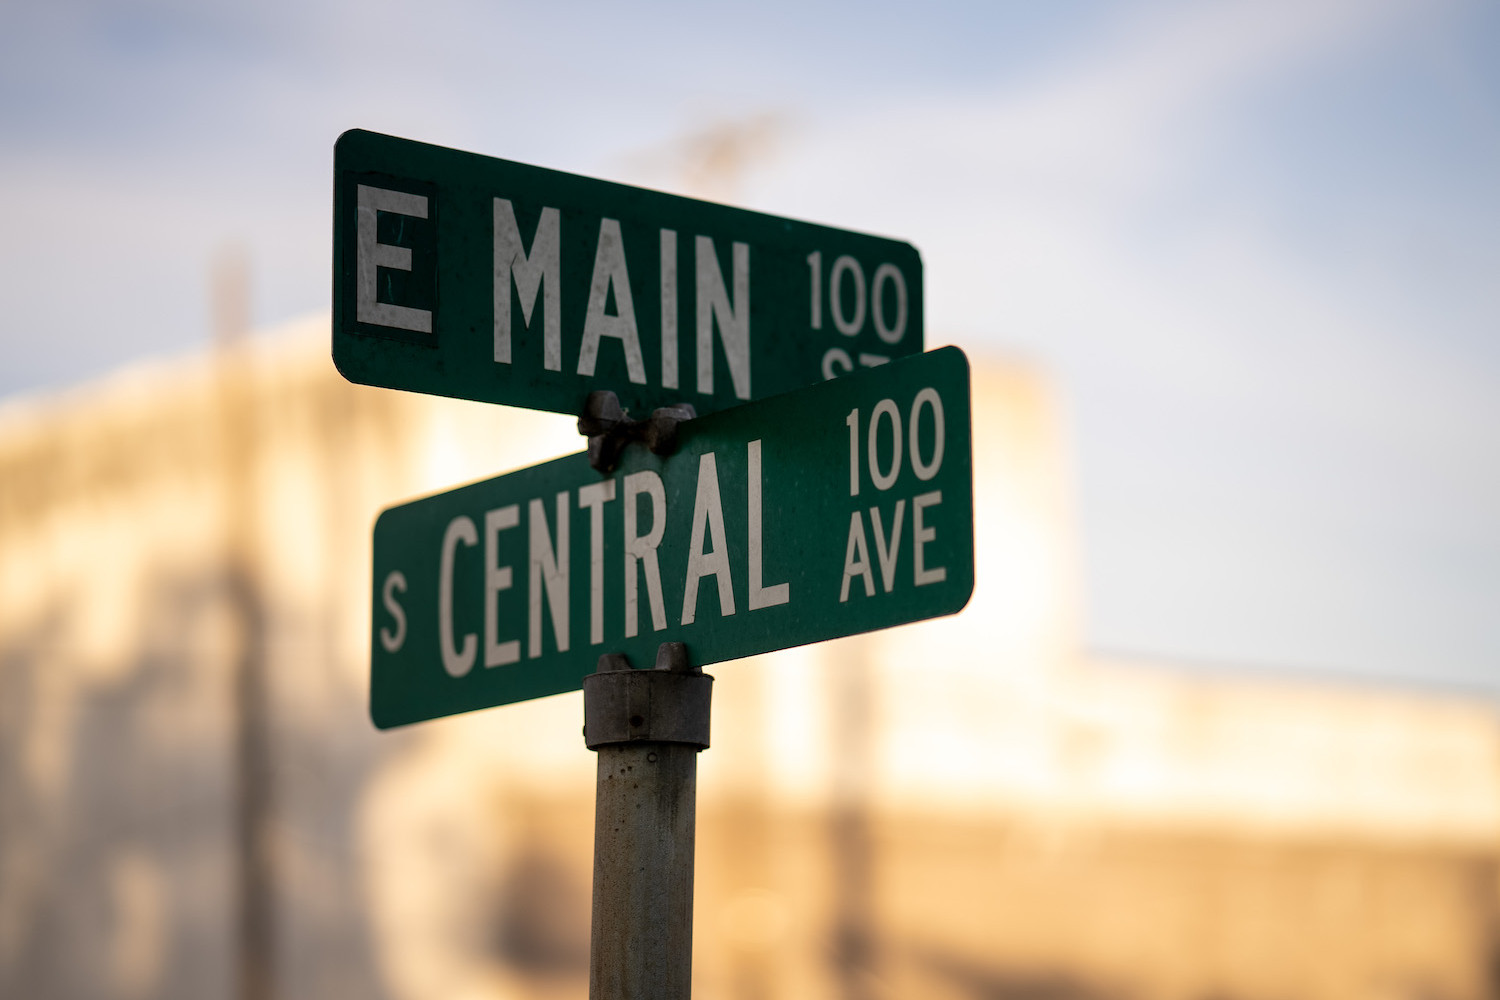 Sunset view of E Main and S Central street sign